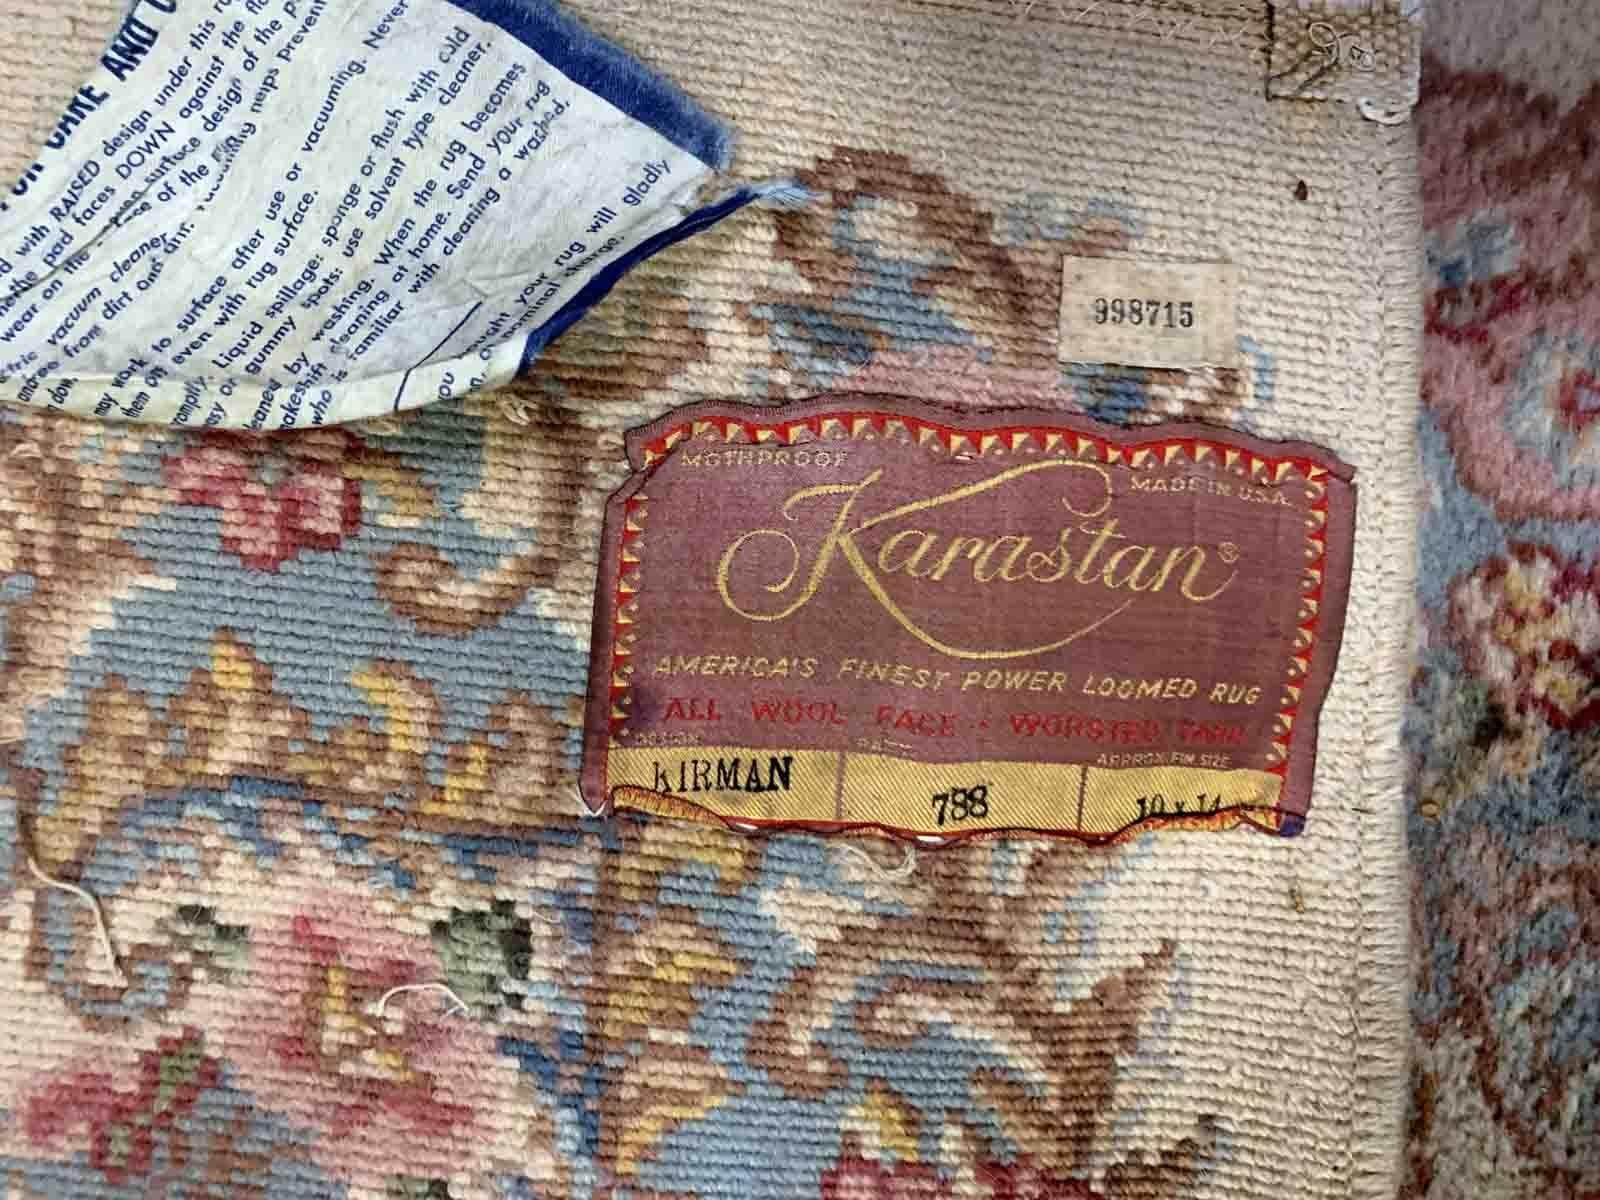 Vintage American Karastan rug made in beige wool. The rug has been made in USA with Persian Kerman design. This piece is from the middle of 20th century in original good condition.

-condition: original good,

-circa: 1950s,

-size: 9.10' x